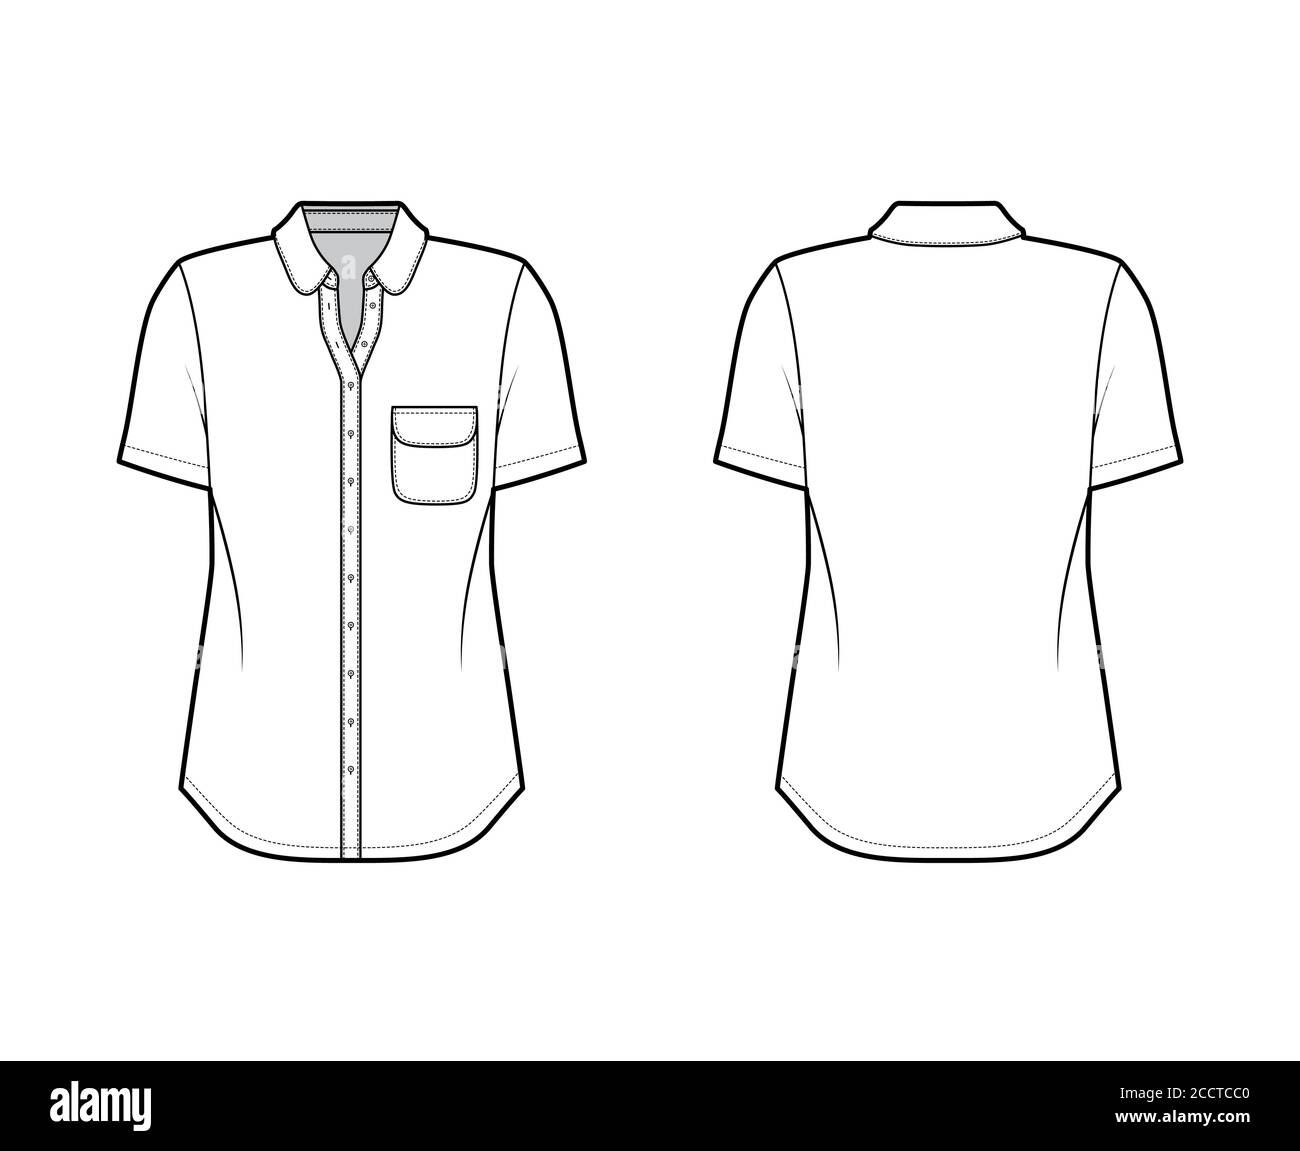 Classic shirt technical fashion illustration with rounded pocket and ...